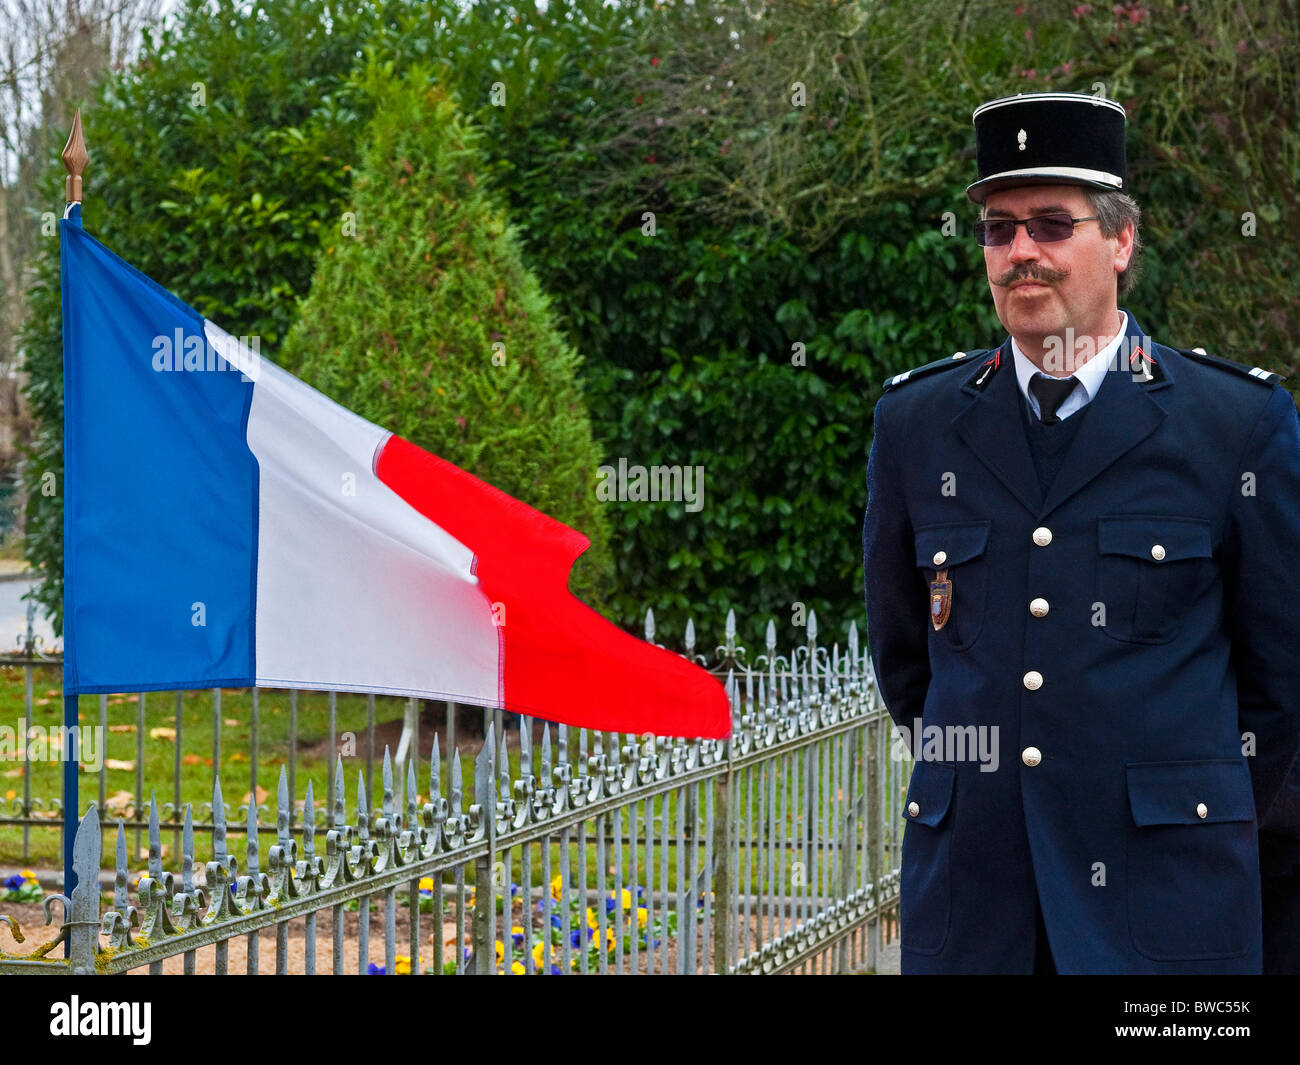 French Sapeur-pompier / fireman in dress uniform at Remembrance Day parade - France. Stock Photo